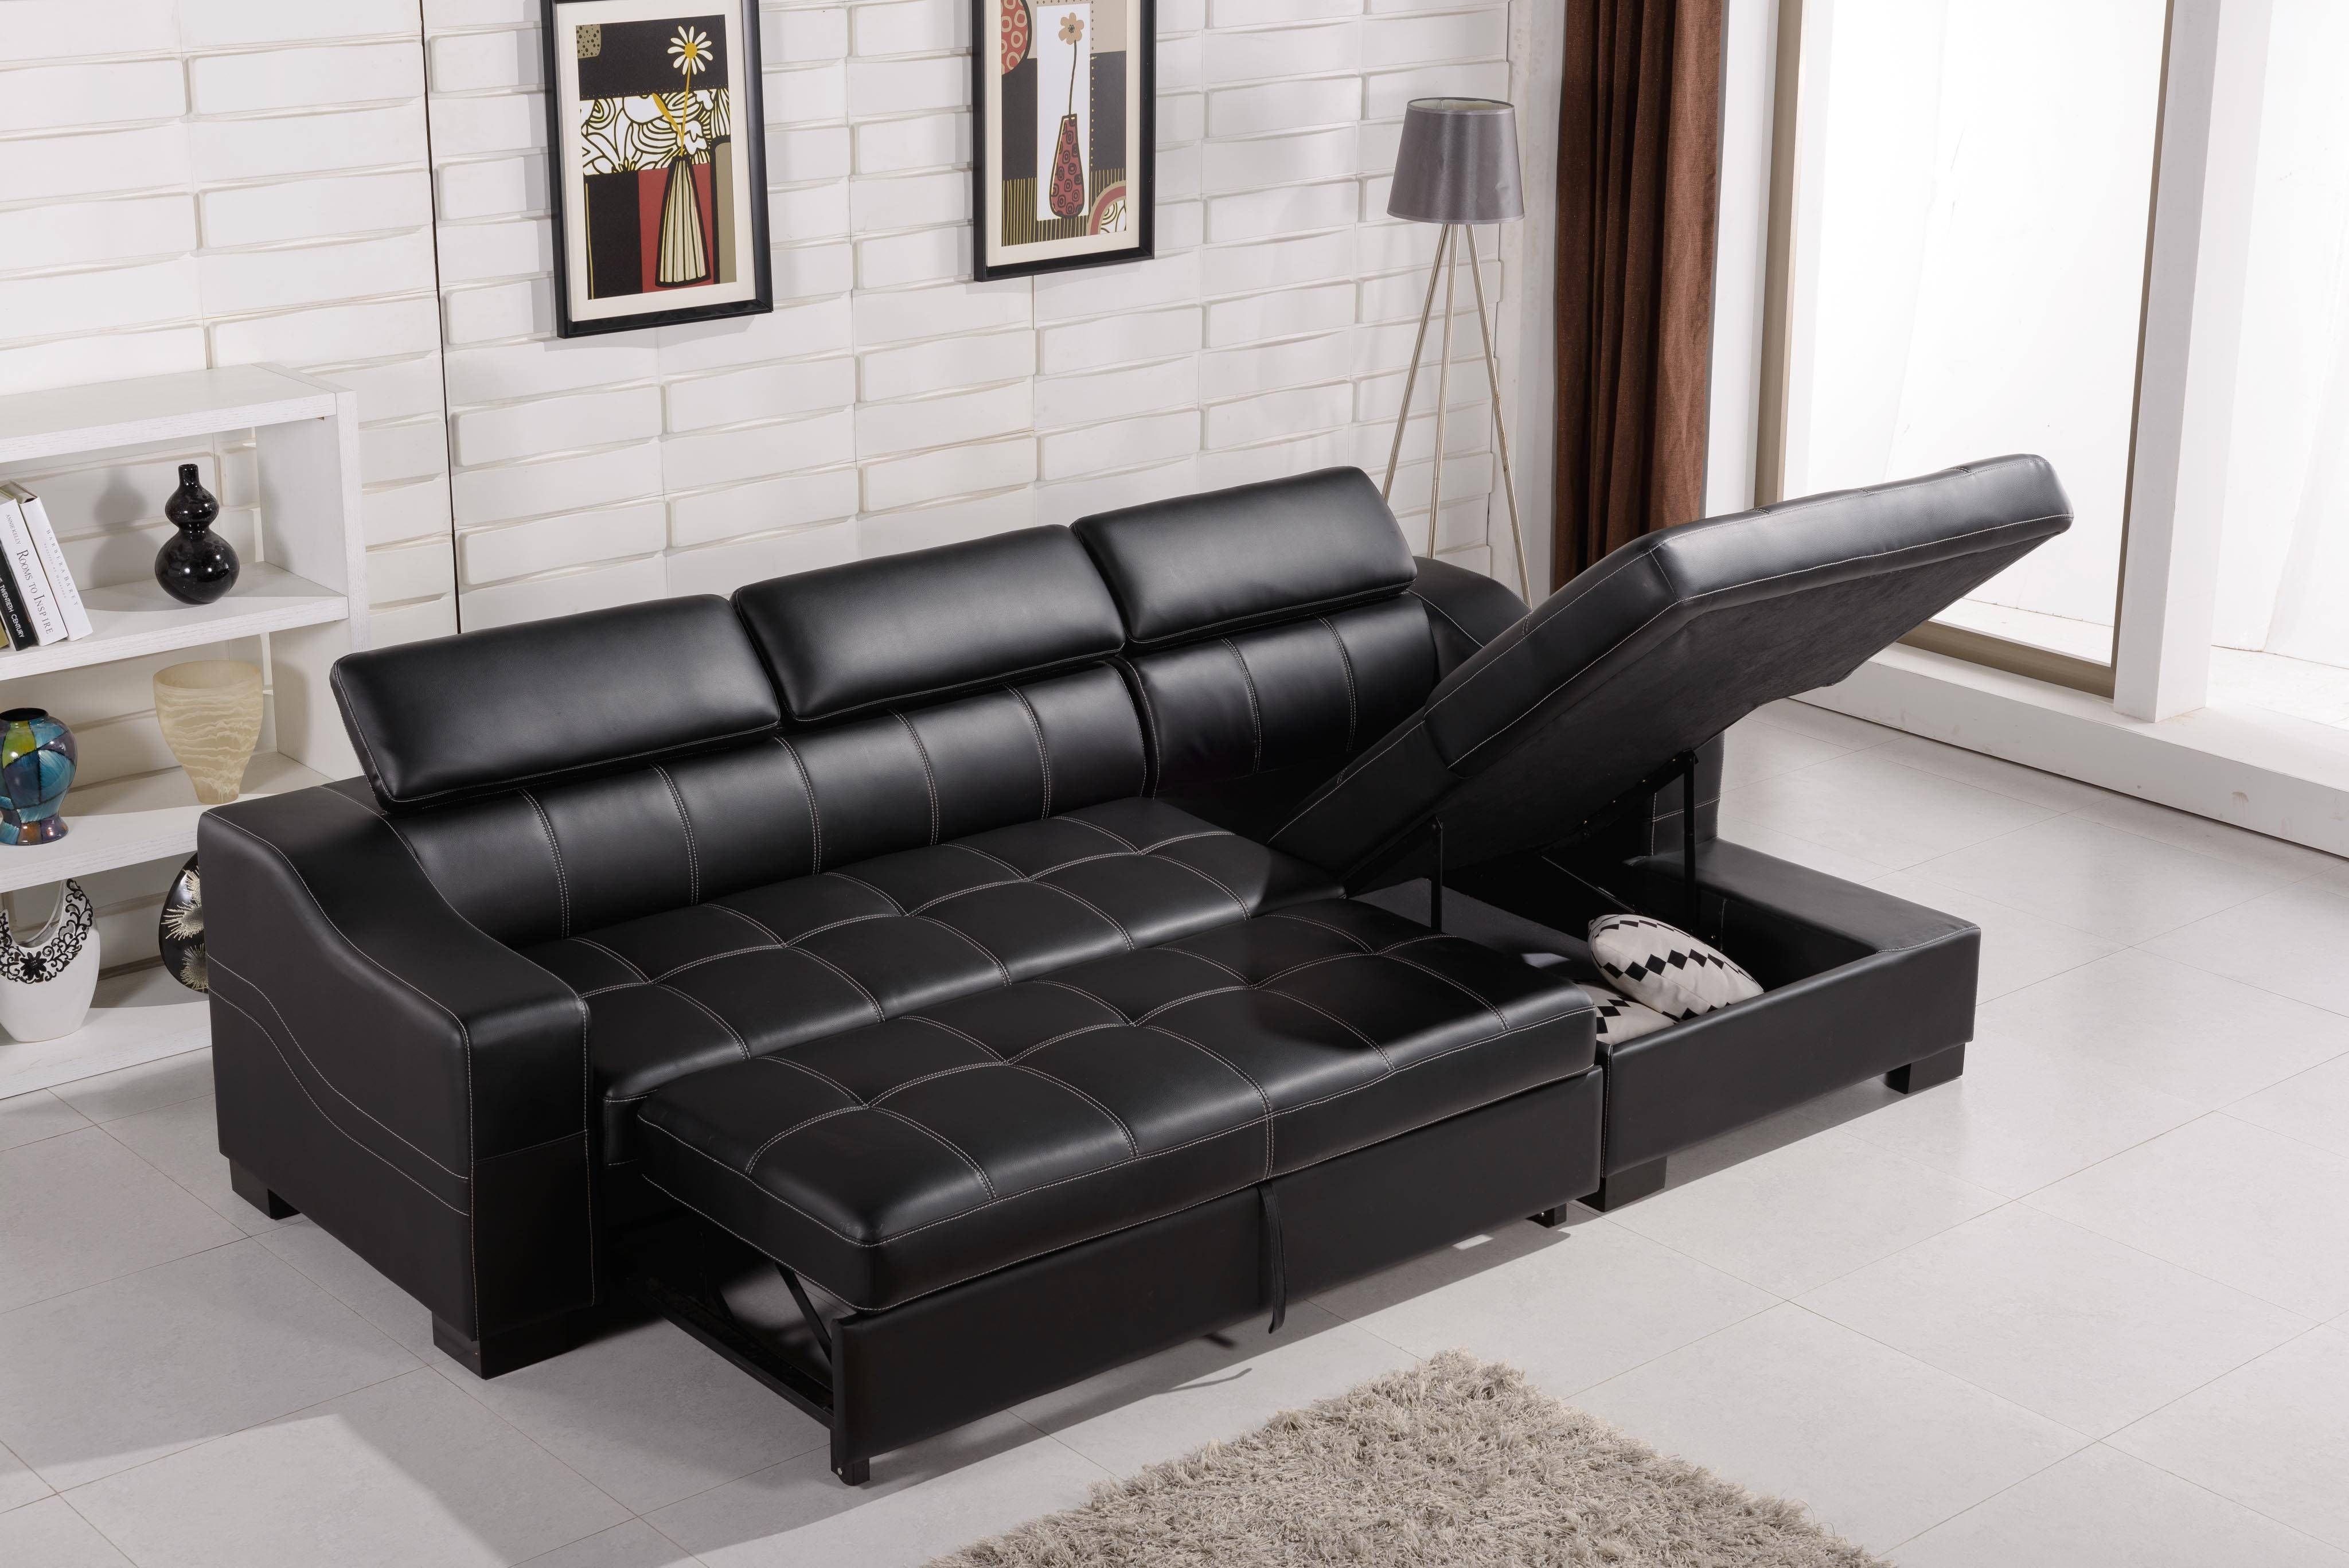 Sofas Center : Leather Sectional Sleeper Sofa With Chaise Cymun With Regard To Black Leather Sectional Sleeper Sofas (Photo 8 of 30)